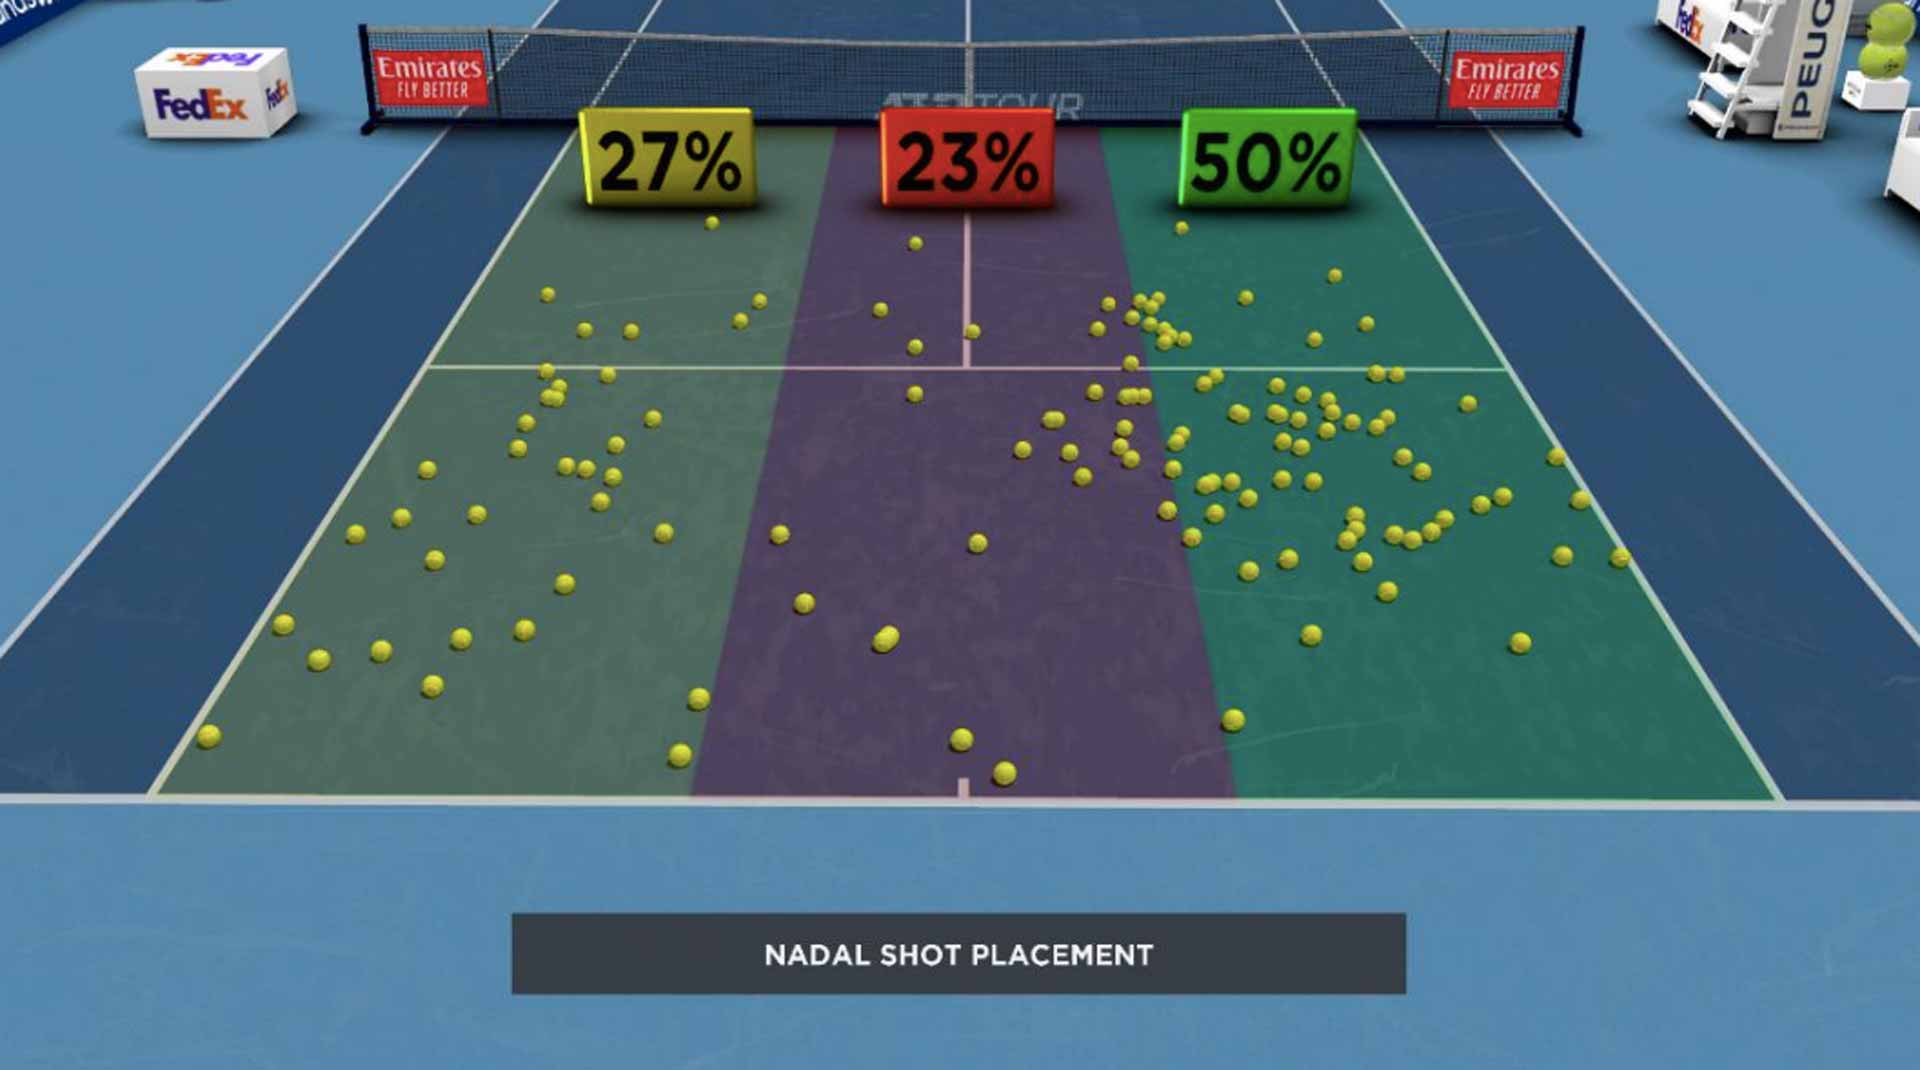 Nadal Shot Placement